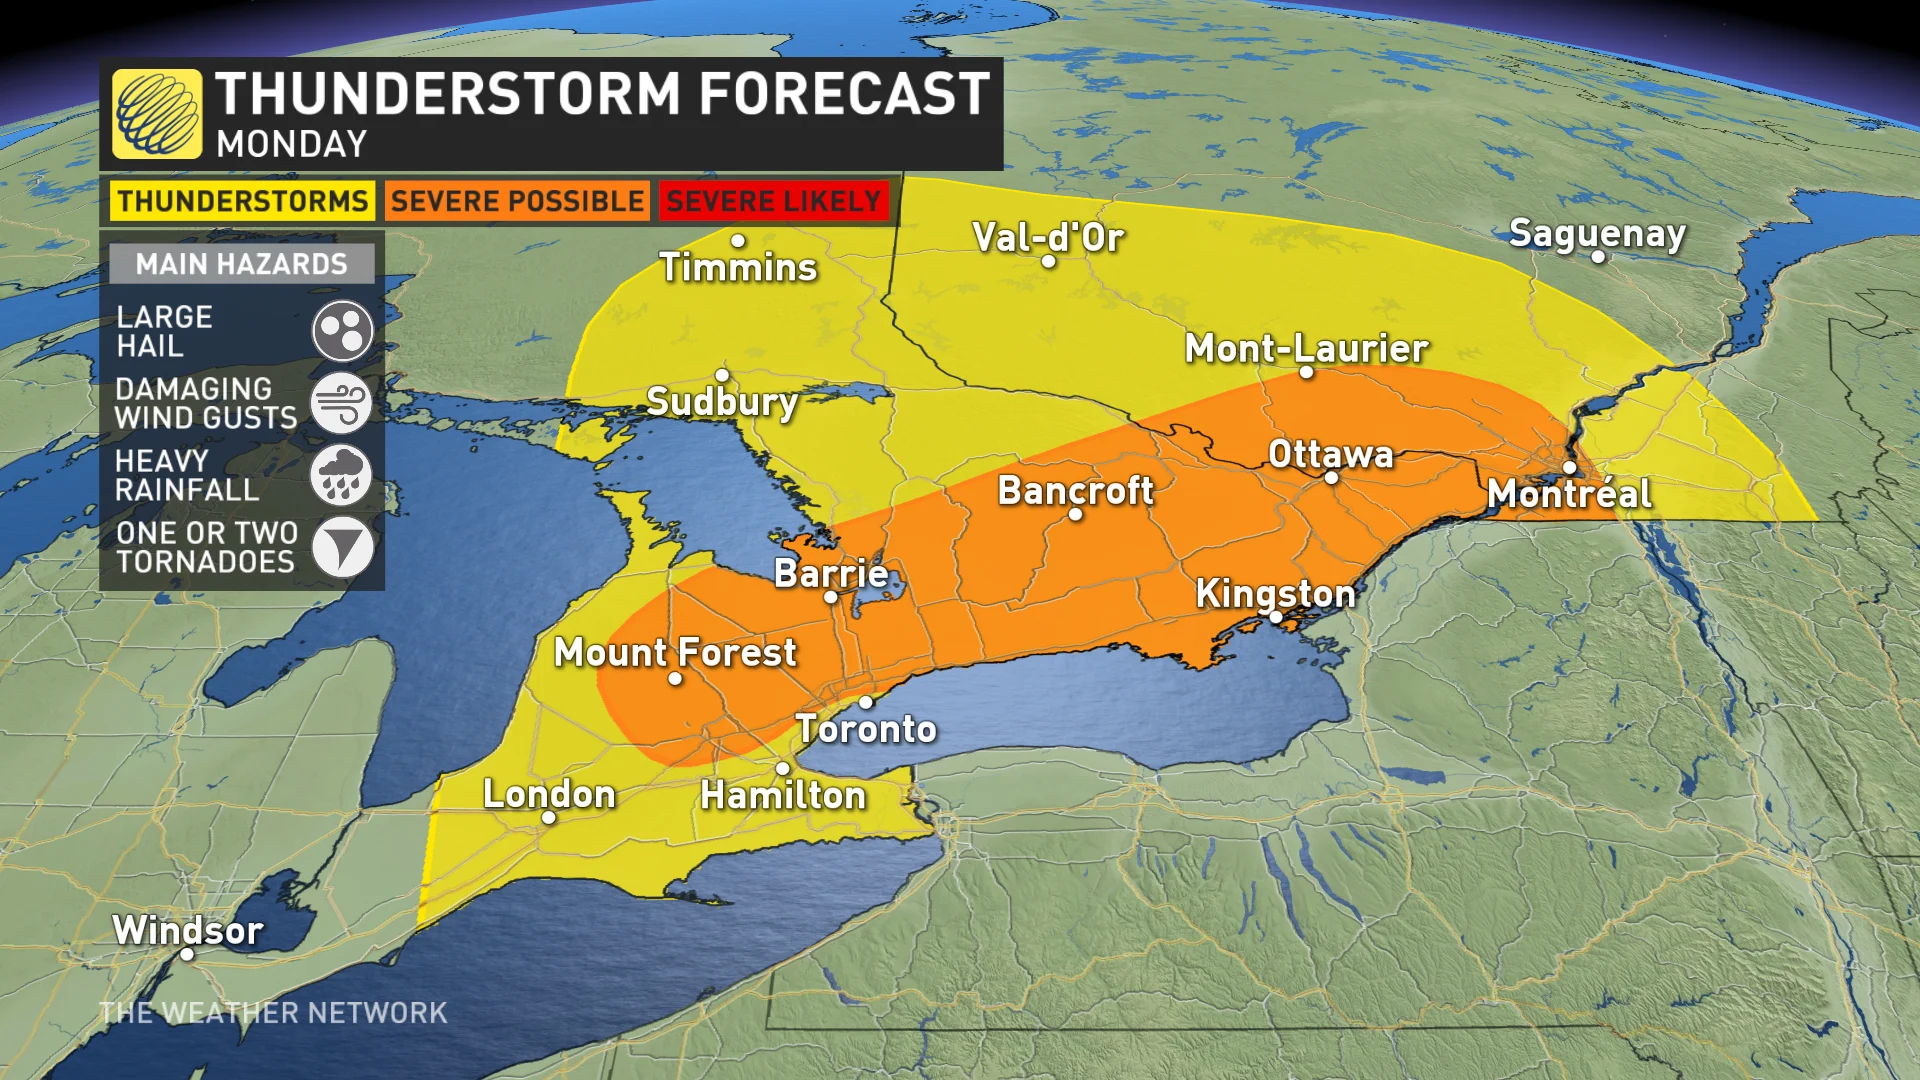 Baron - ON storm risk updated - May 27